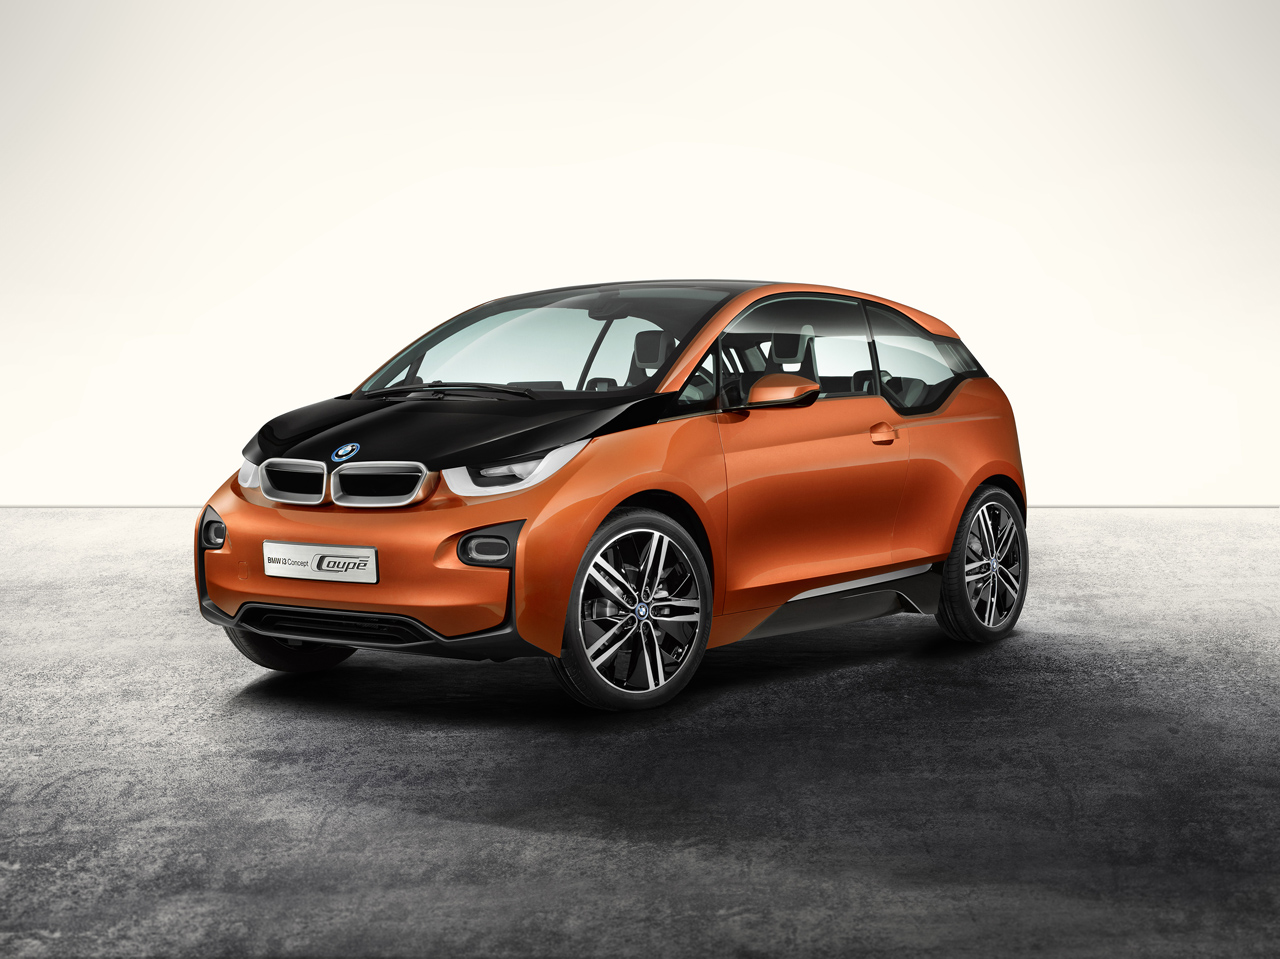 BMW I3 Coupe Concept HD wallpapers, Desktop wallpaper - most viewed